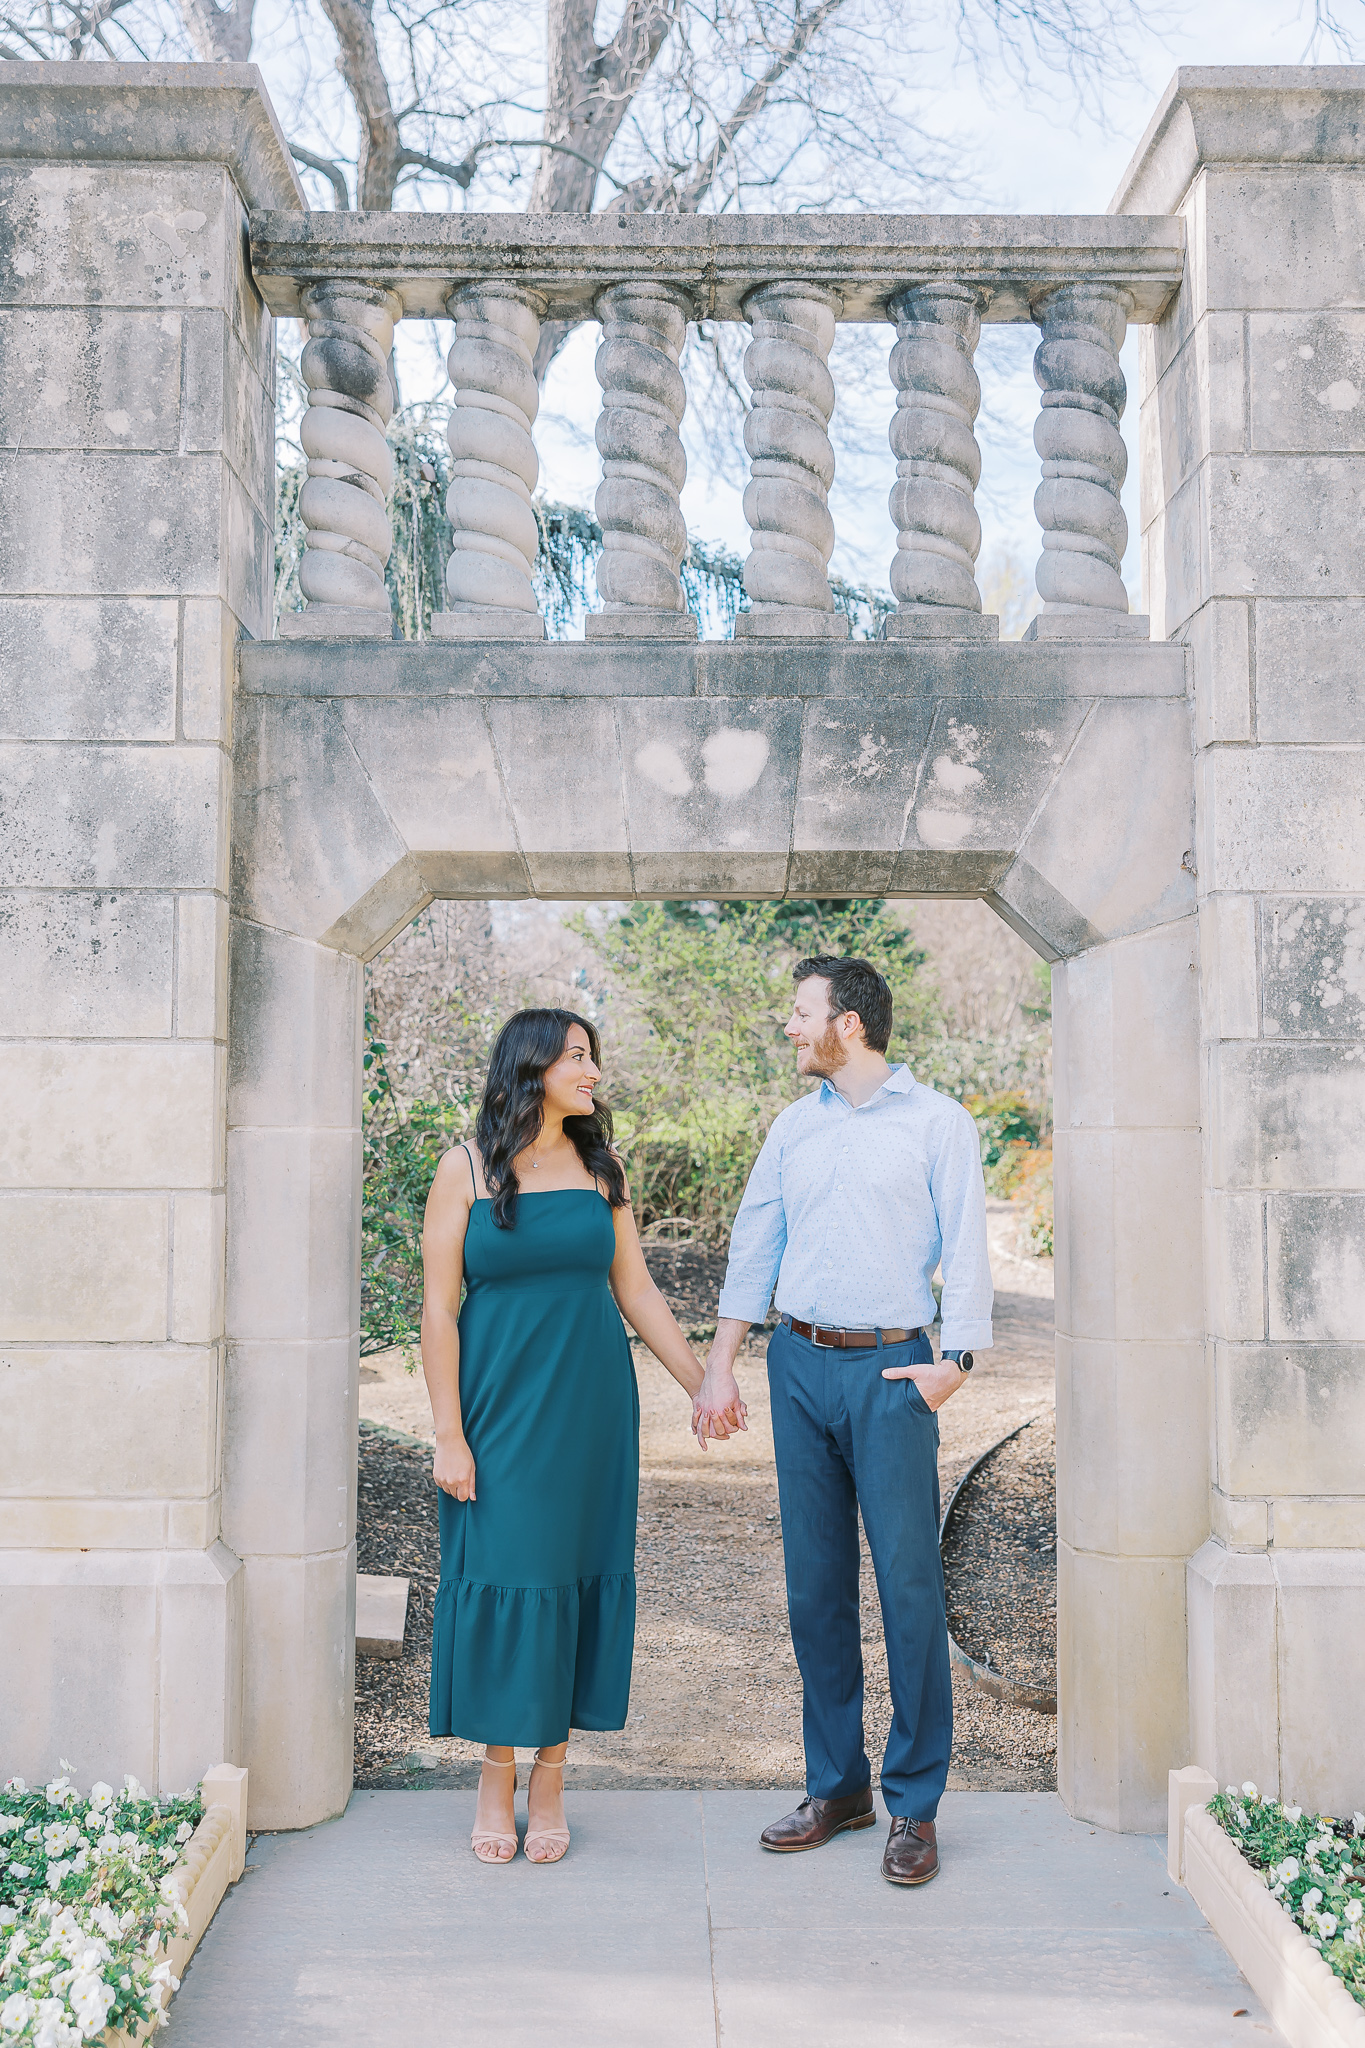 dallas arboretum engagement session, dallas arboretum, dallas arboretum engagement, dallas engagement session, dallas engagement photographer, dallas wedding photographer, brides of north texas, the knotting hill place